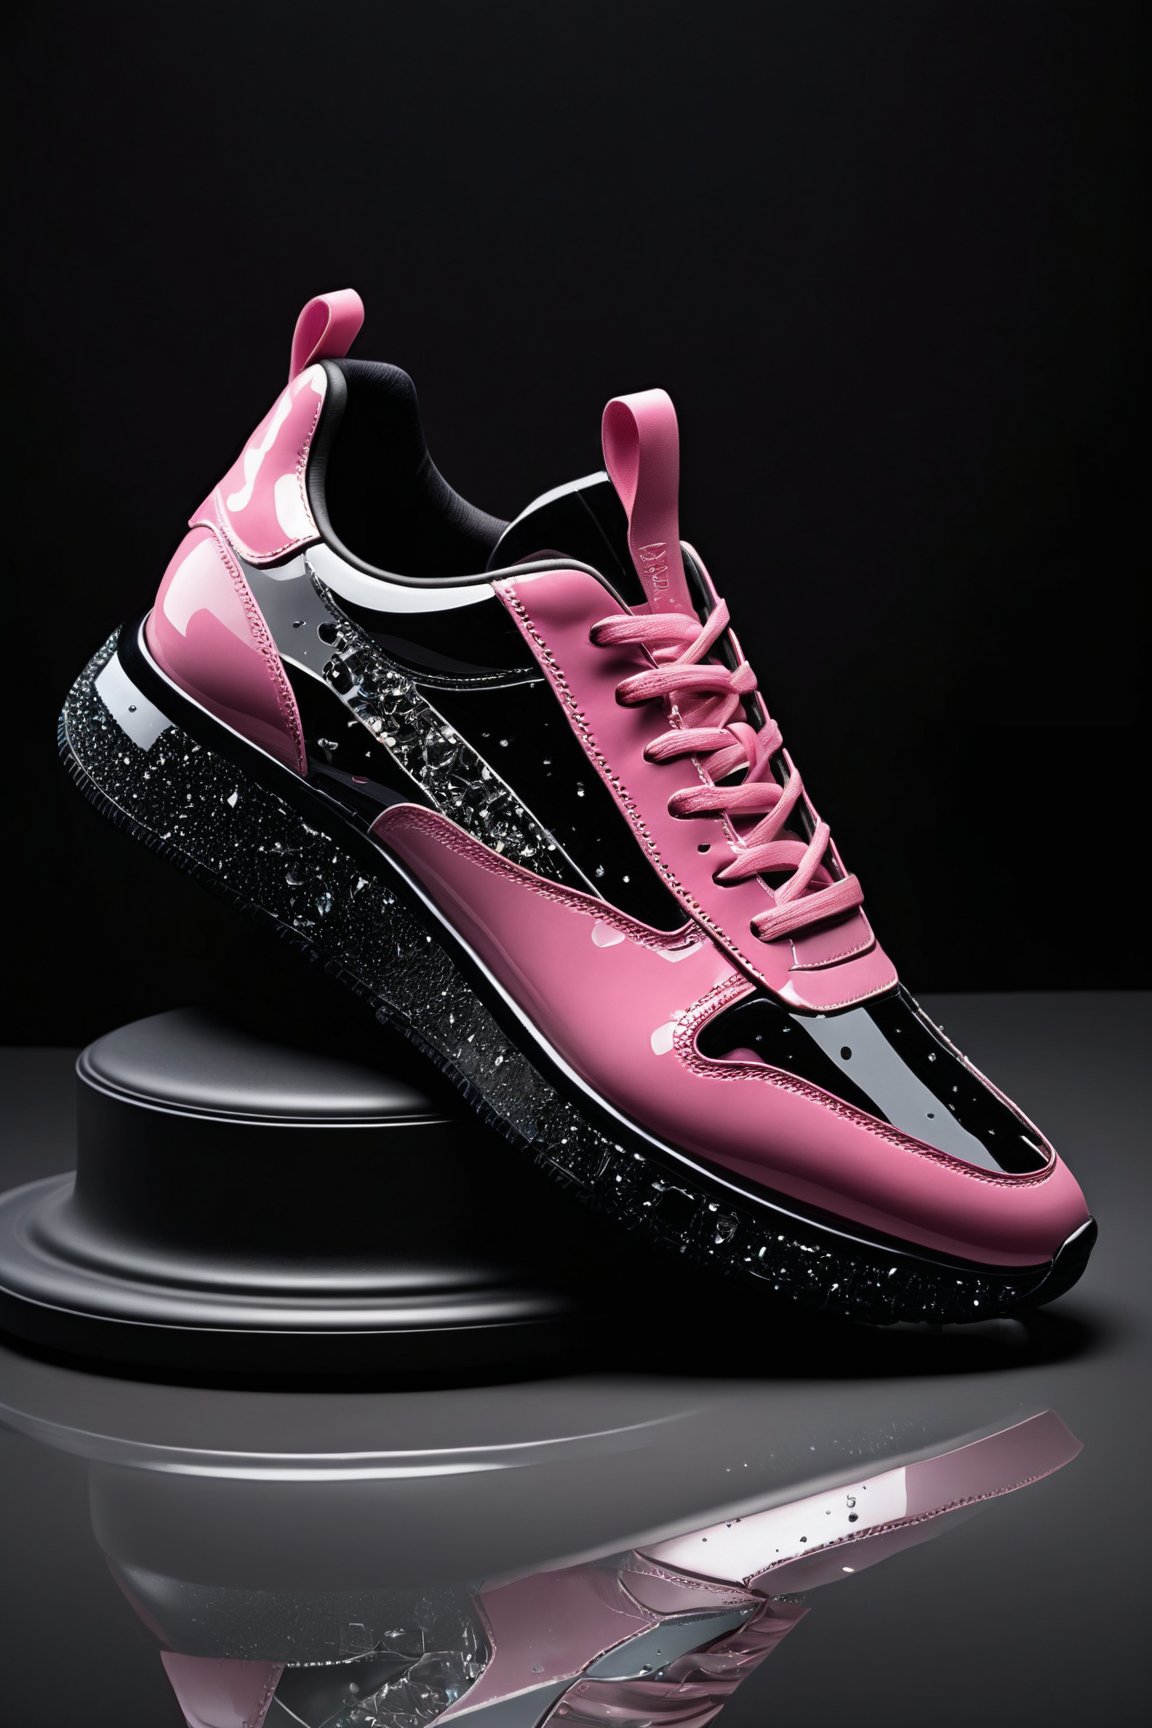 (best quality,8K,highres,masterpiece), ultra-detailed, presenting an edgy sneakers design against a sleek black background. The shoes feature a striking pink theme, with accents of vibrant hues that pop against the dark backdrop. Adding to the allure of the design, shattered fragments of glass are artfully integrated into the composition, lending a sense of urban grit and sophistication. The broken glass elements are meticulously crafted, with jagged edges and reflective surfaces that catch and refract light in captivating ways. Despite the apparent chaos of the shattered glass, there's a sense of cohesion and harmony in the overall design, creating a visually arresting contrast between strength and fragility. These sneakers embody the spirit of boldness and resilience, making a powerful statement of individuality and style. This artwork celebrates the beauty of contrasts, inviting the viewer to embrace both the darkness and the light within.